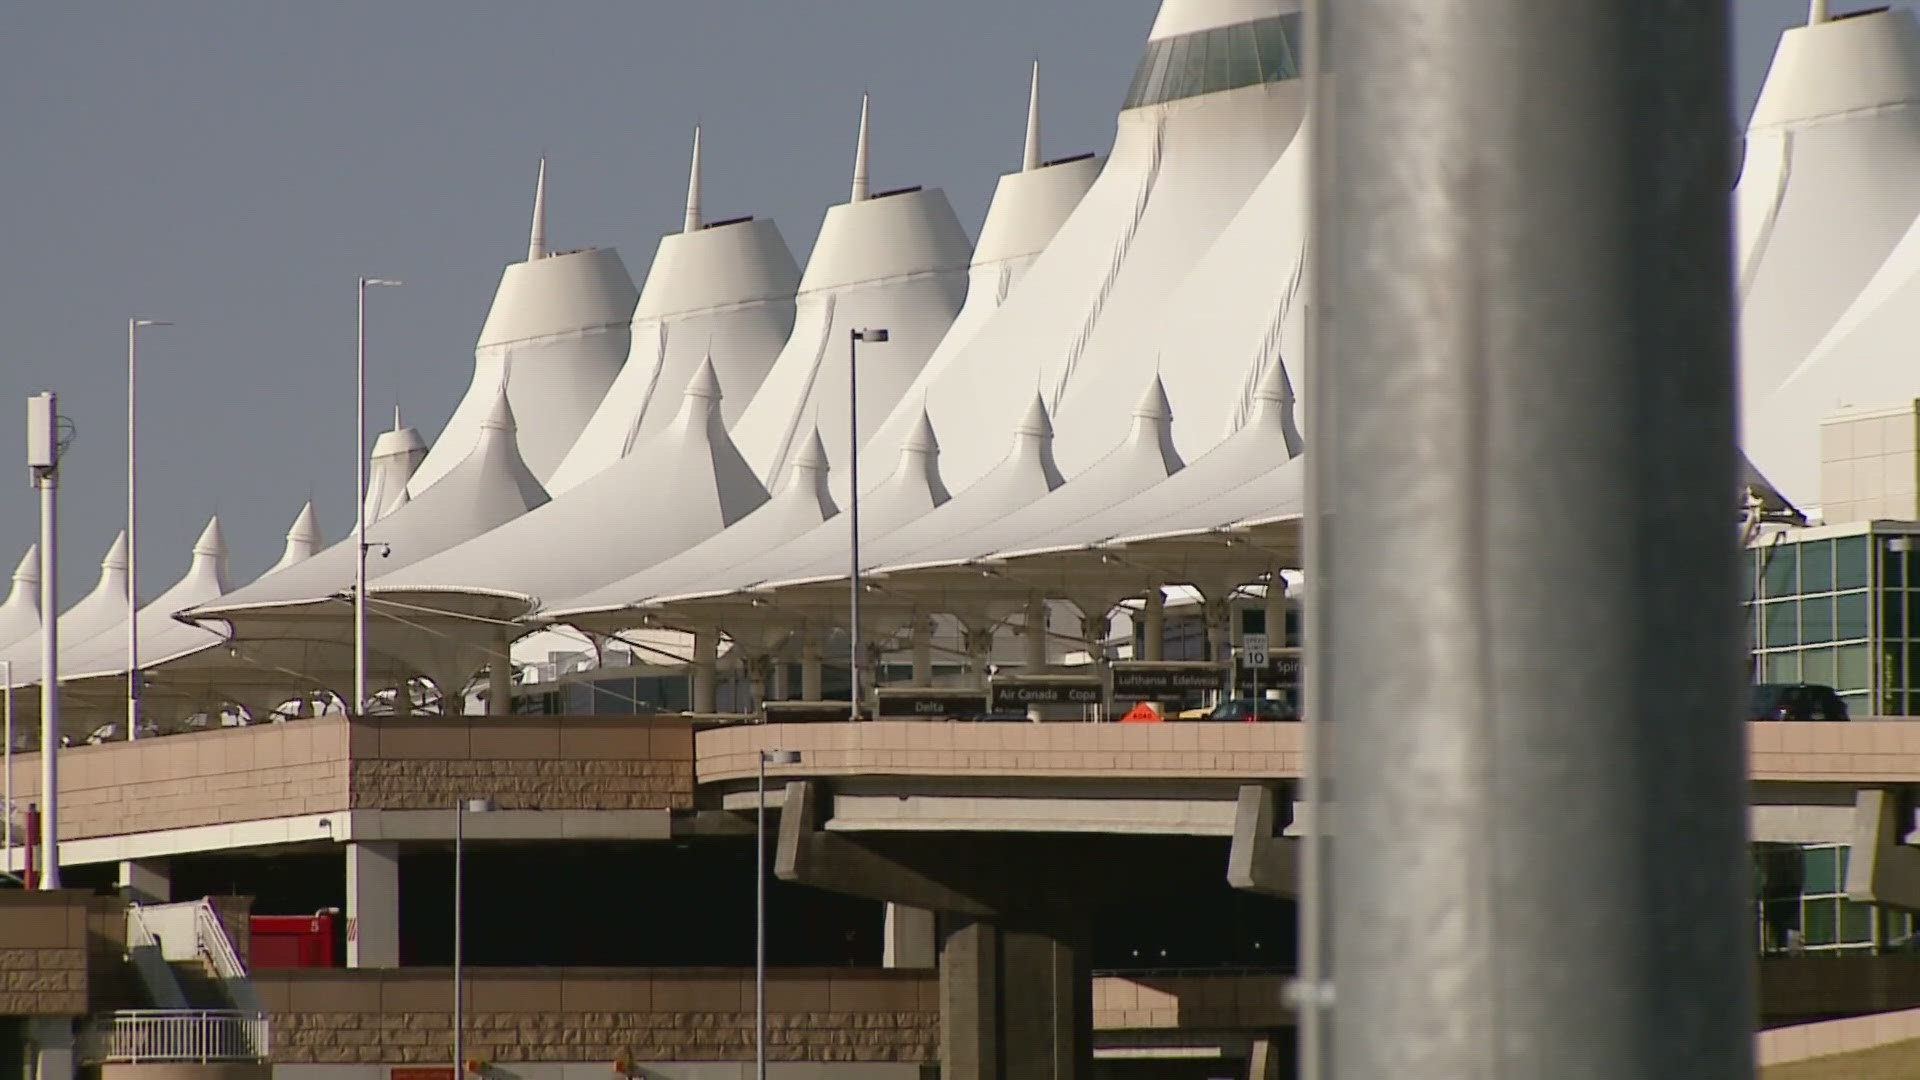 The Colorado Auto Theft Prevention Authority attributes much of the decrease in airport car thefts to new security measures.